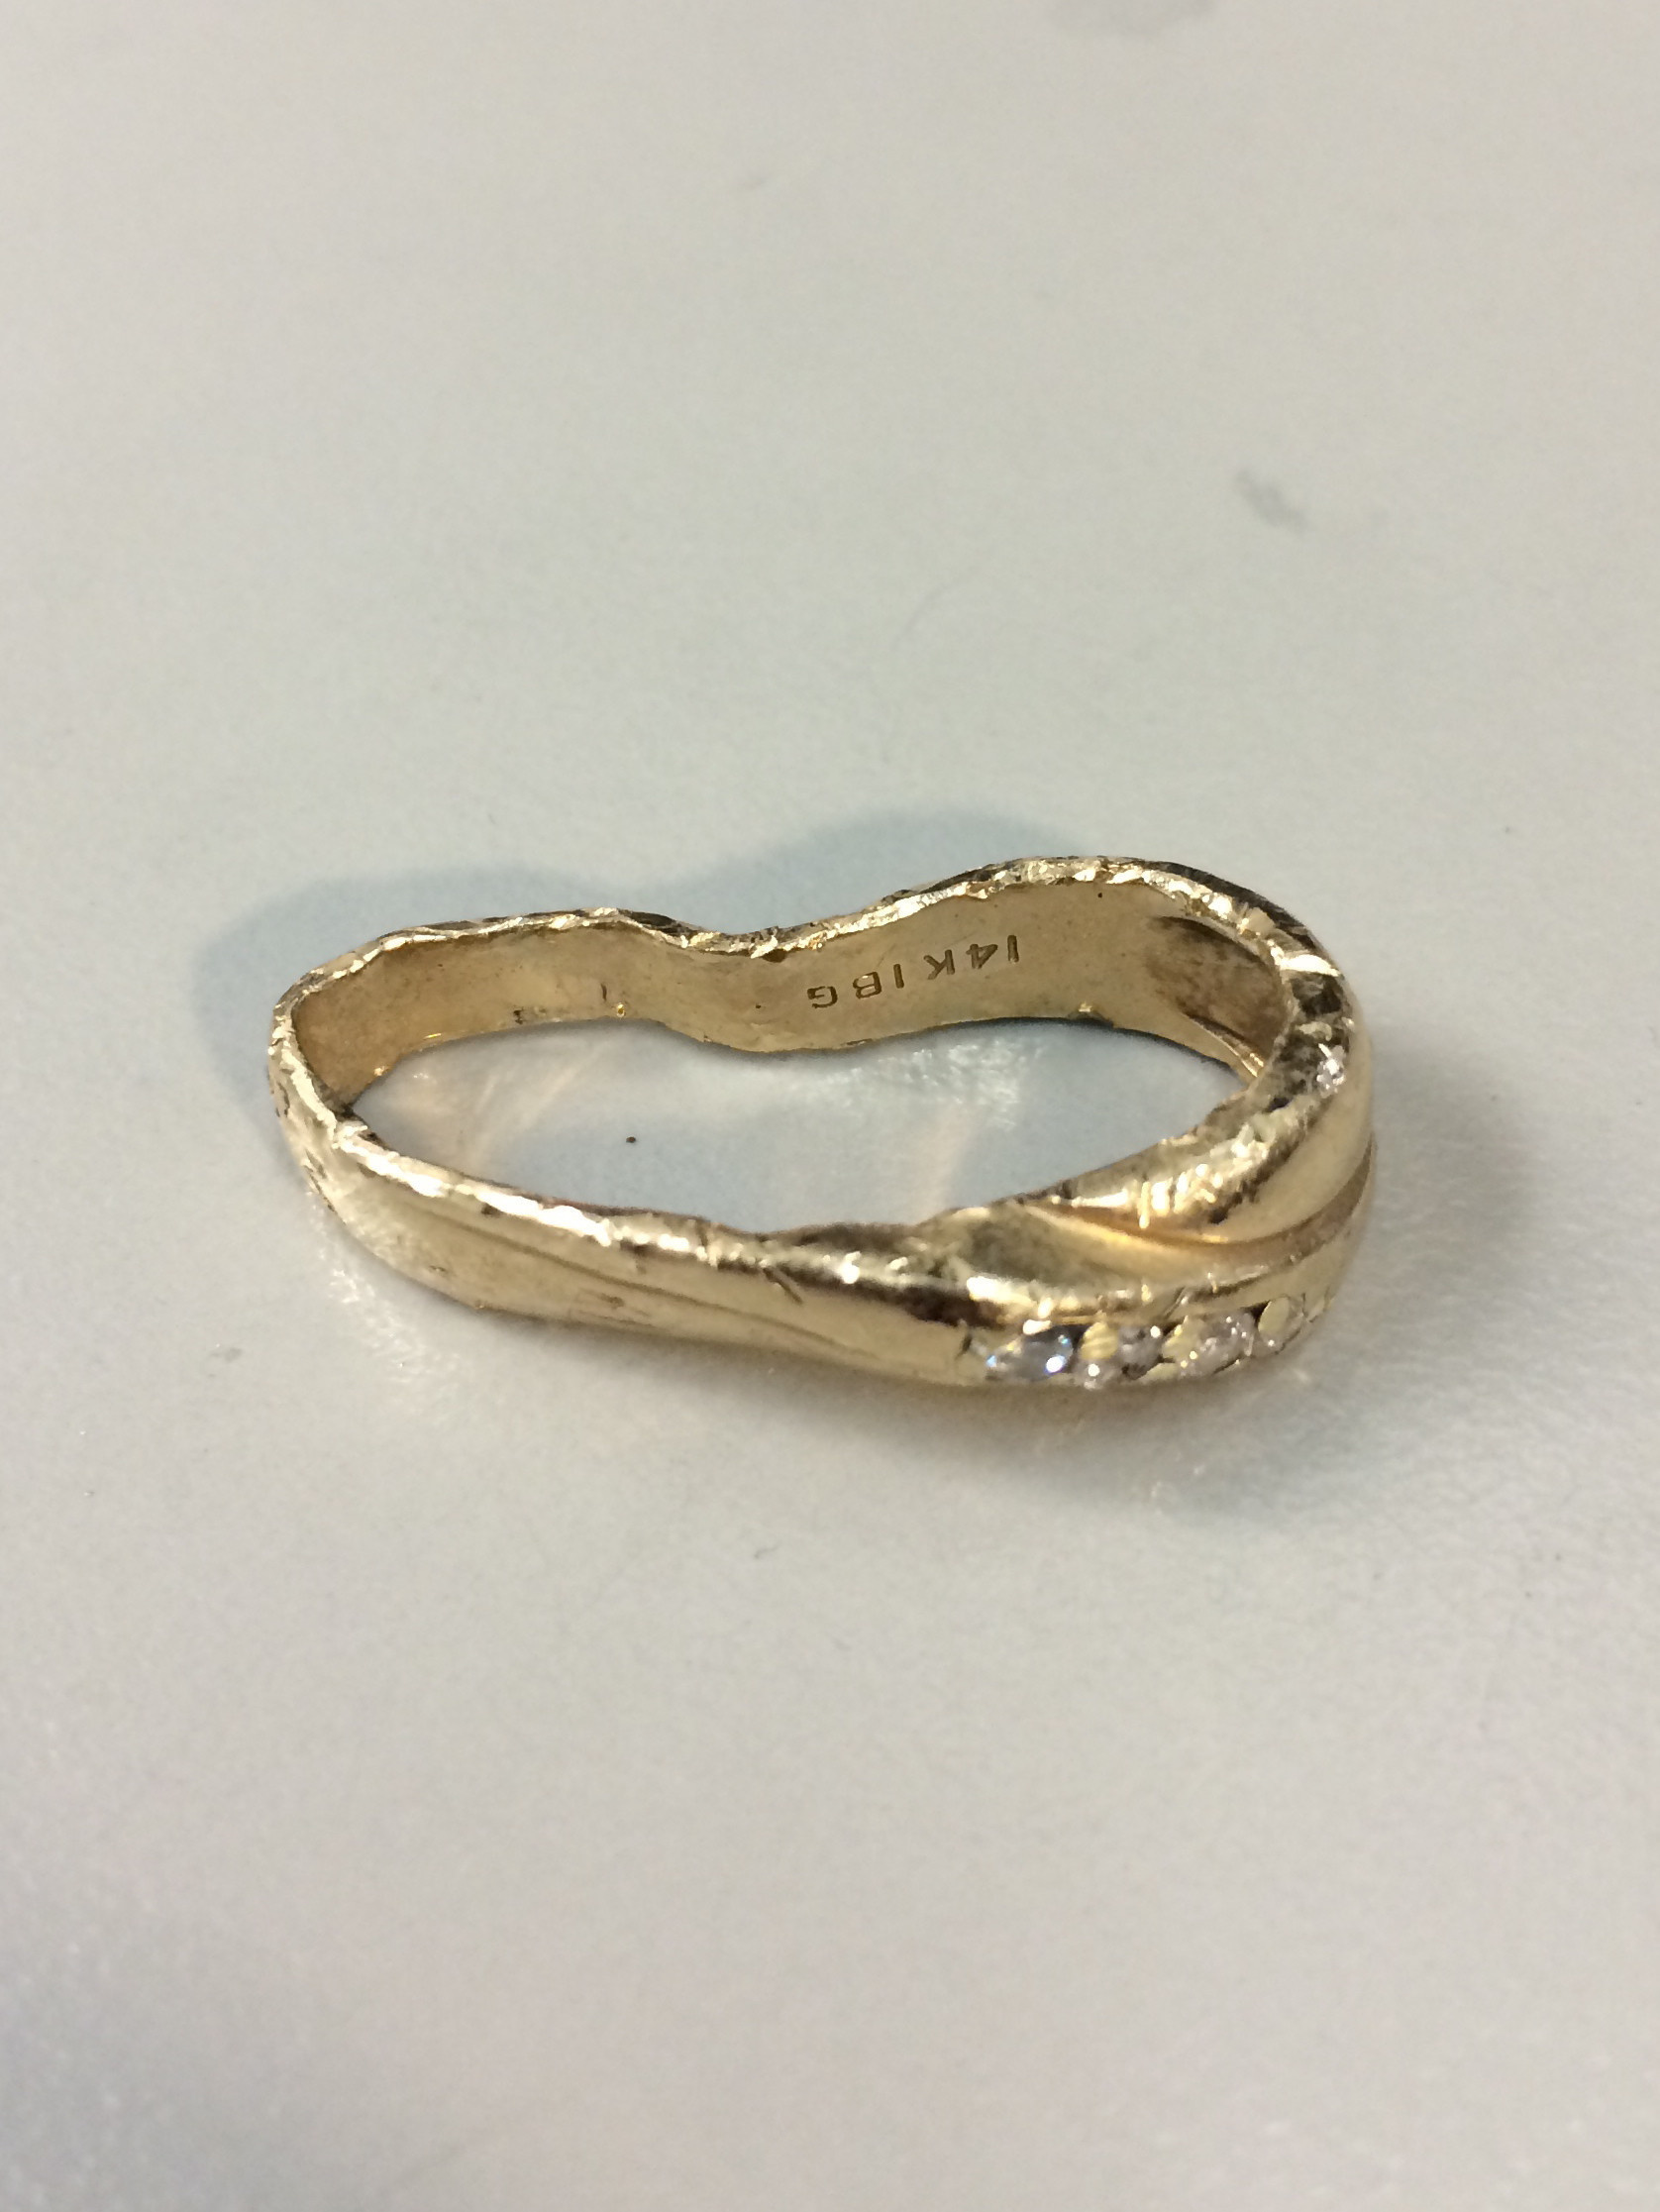 A man brought the restorer his wedding ring: It had been dropped into a running garbage disposal.